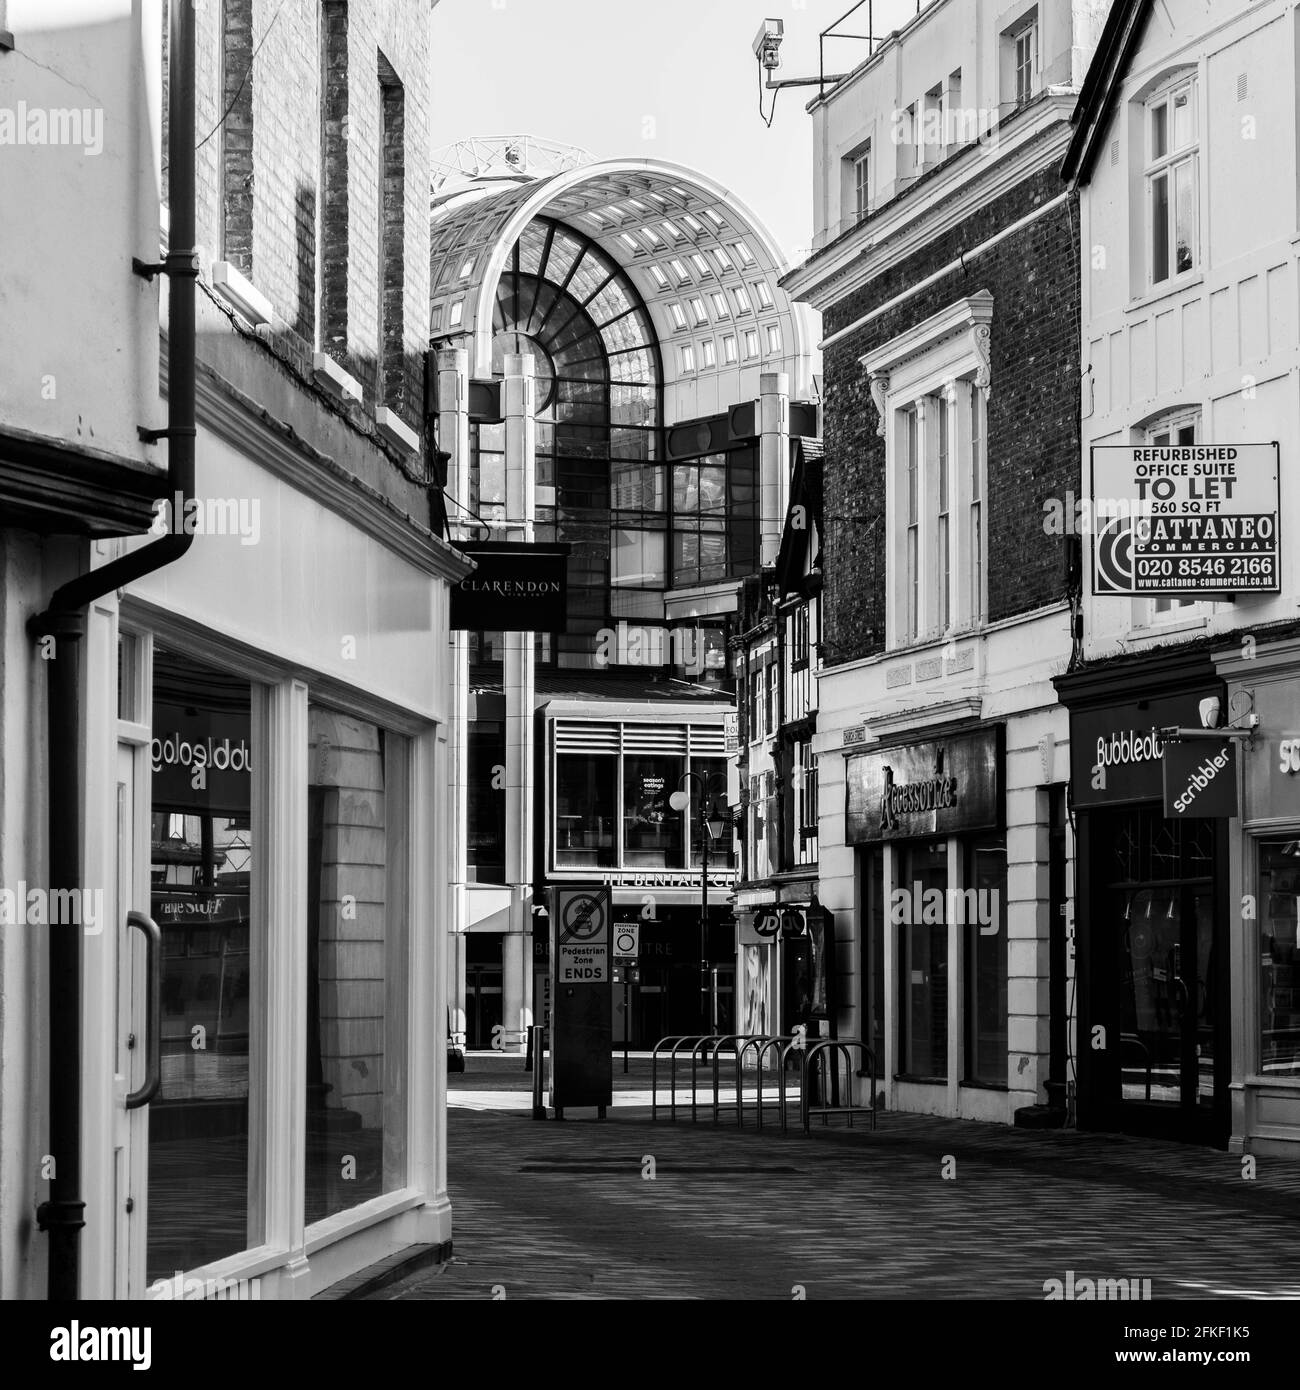 Kingston Upon Thames, London UK, April 2021, Empty Street And Closed Shops By Bentalls Centre During Coronavirus Covid-19 Lockdown With No People Stock Photo